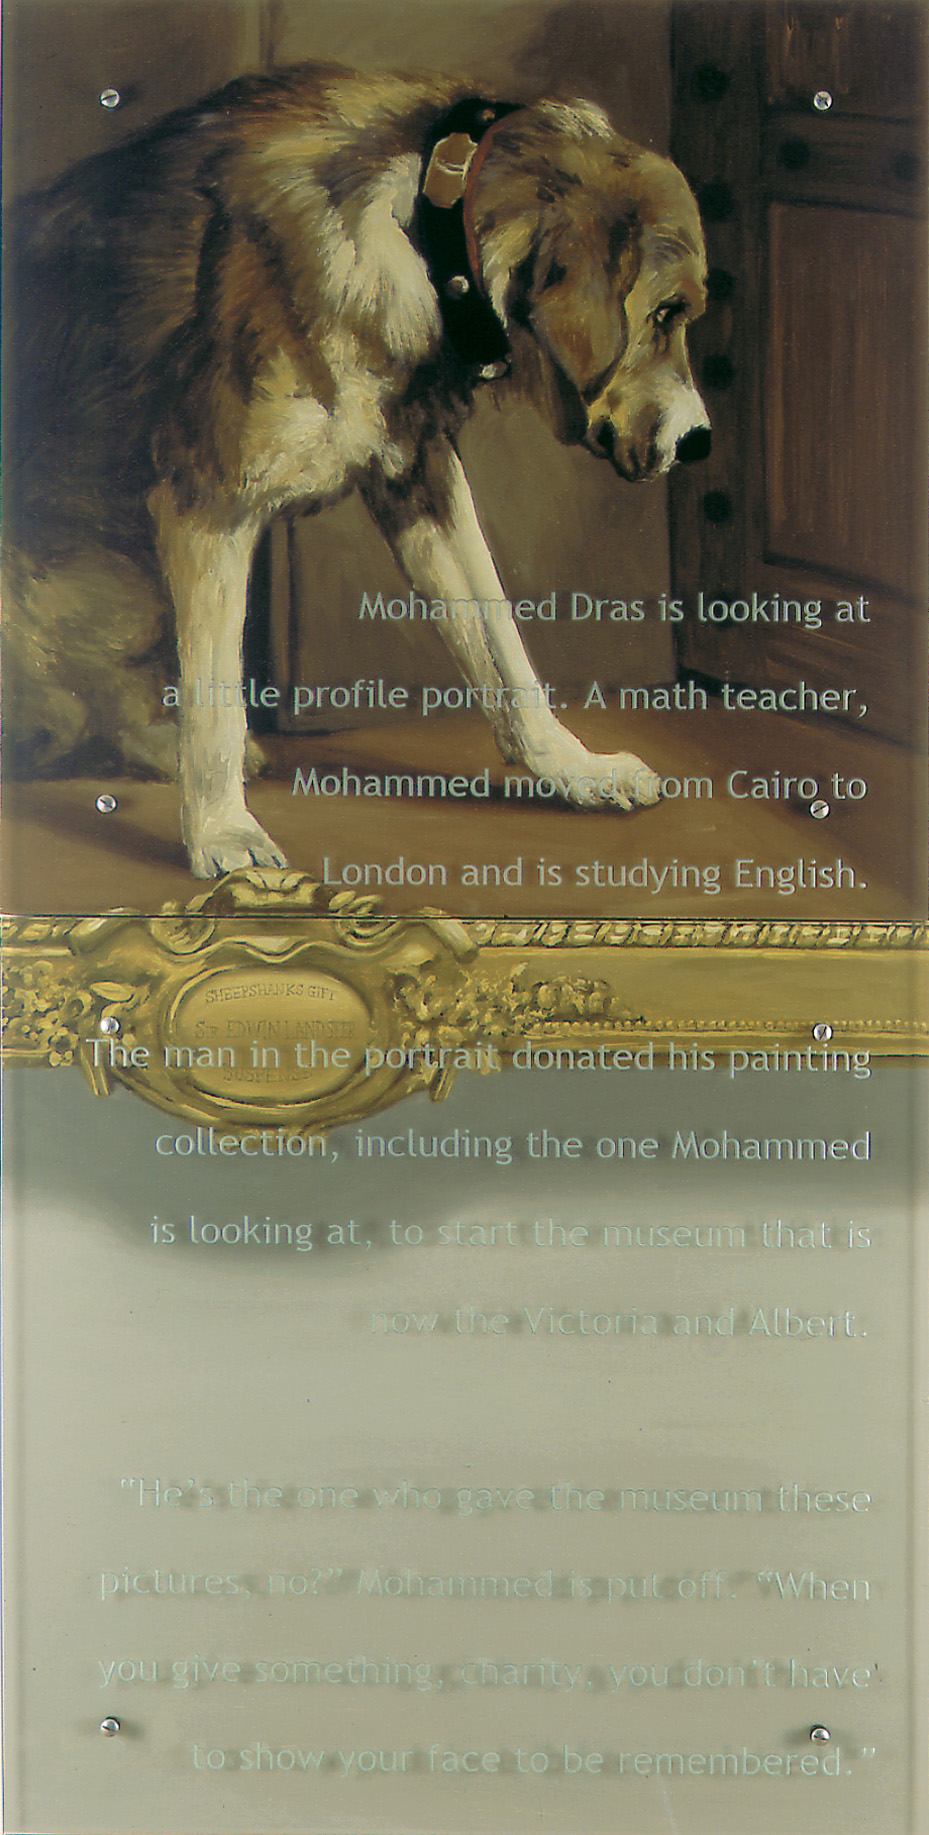 A little profile portrait, 30" x 60" (76.5cm x 76.5cm) diptych, oil/wood, sandblasted glass, bolts After Edwin Landseer, Suspense, V&A, London Text: Mohammed Dras is looking at a little profile portrait. A math teacher, Mohammed moved from Cairo to London and is studying English. The man in the portrait donated his painting collection, including the one Mohammed is looking at, to start the museum that is now the Victoria and Albert. "He's the one who gave the museum these pictures, no?" Mohammed is put off. "When you give something, charity, you don't have to show your face to be remembered."